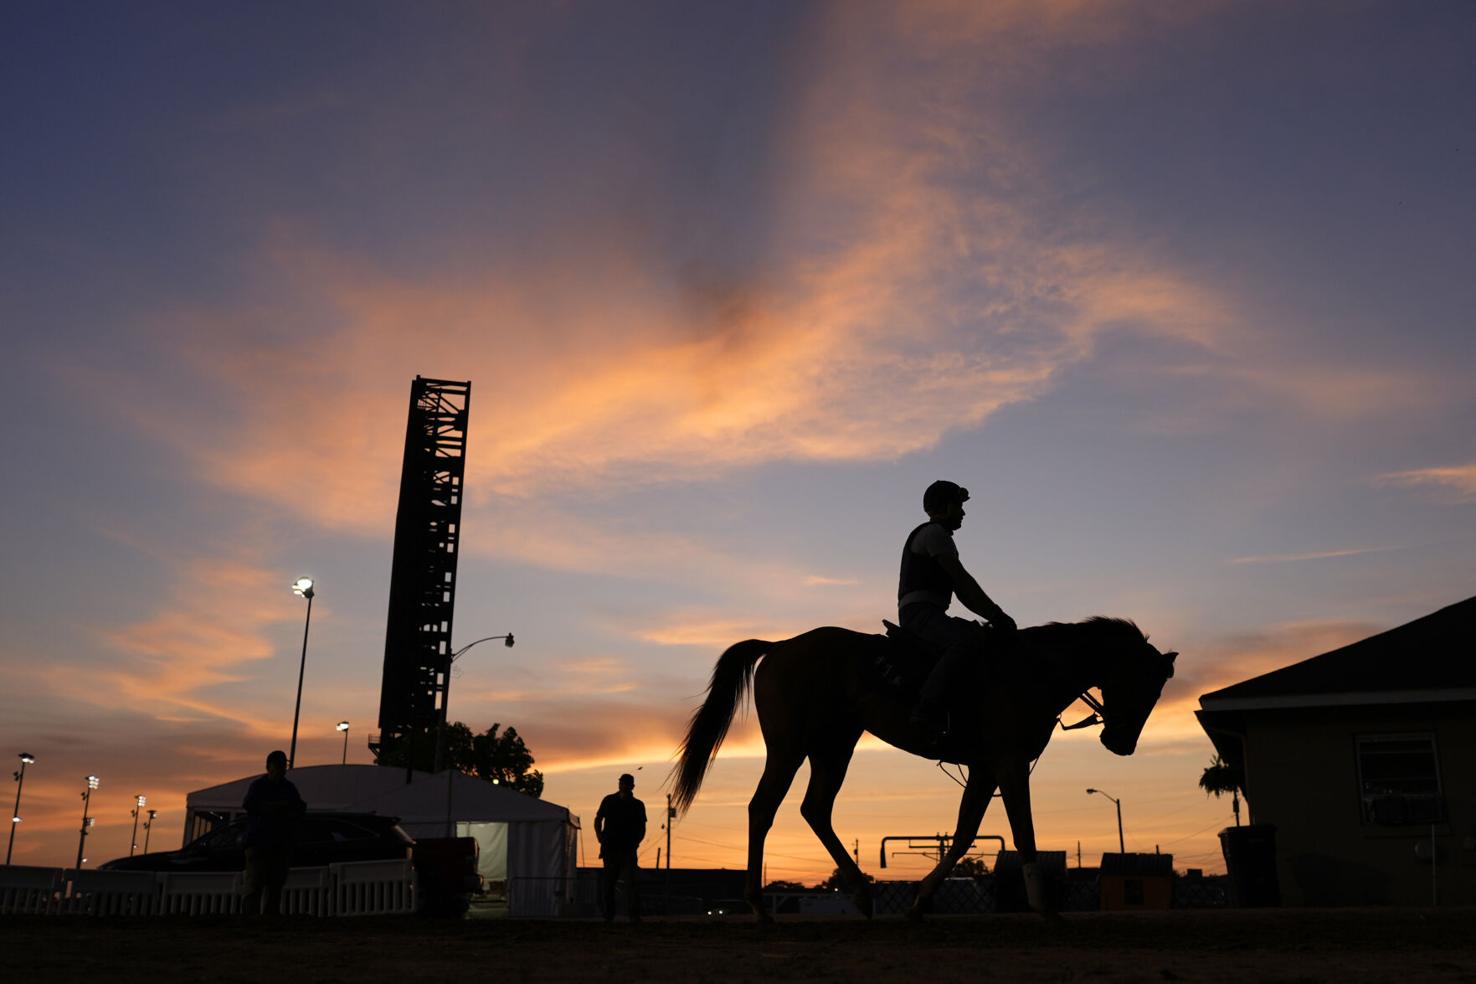 How to watch, what to expect in Kentucky Derby Sports